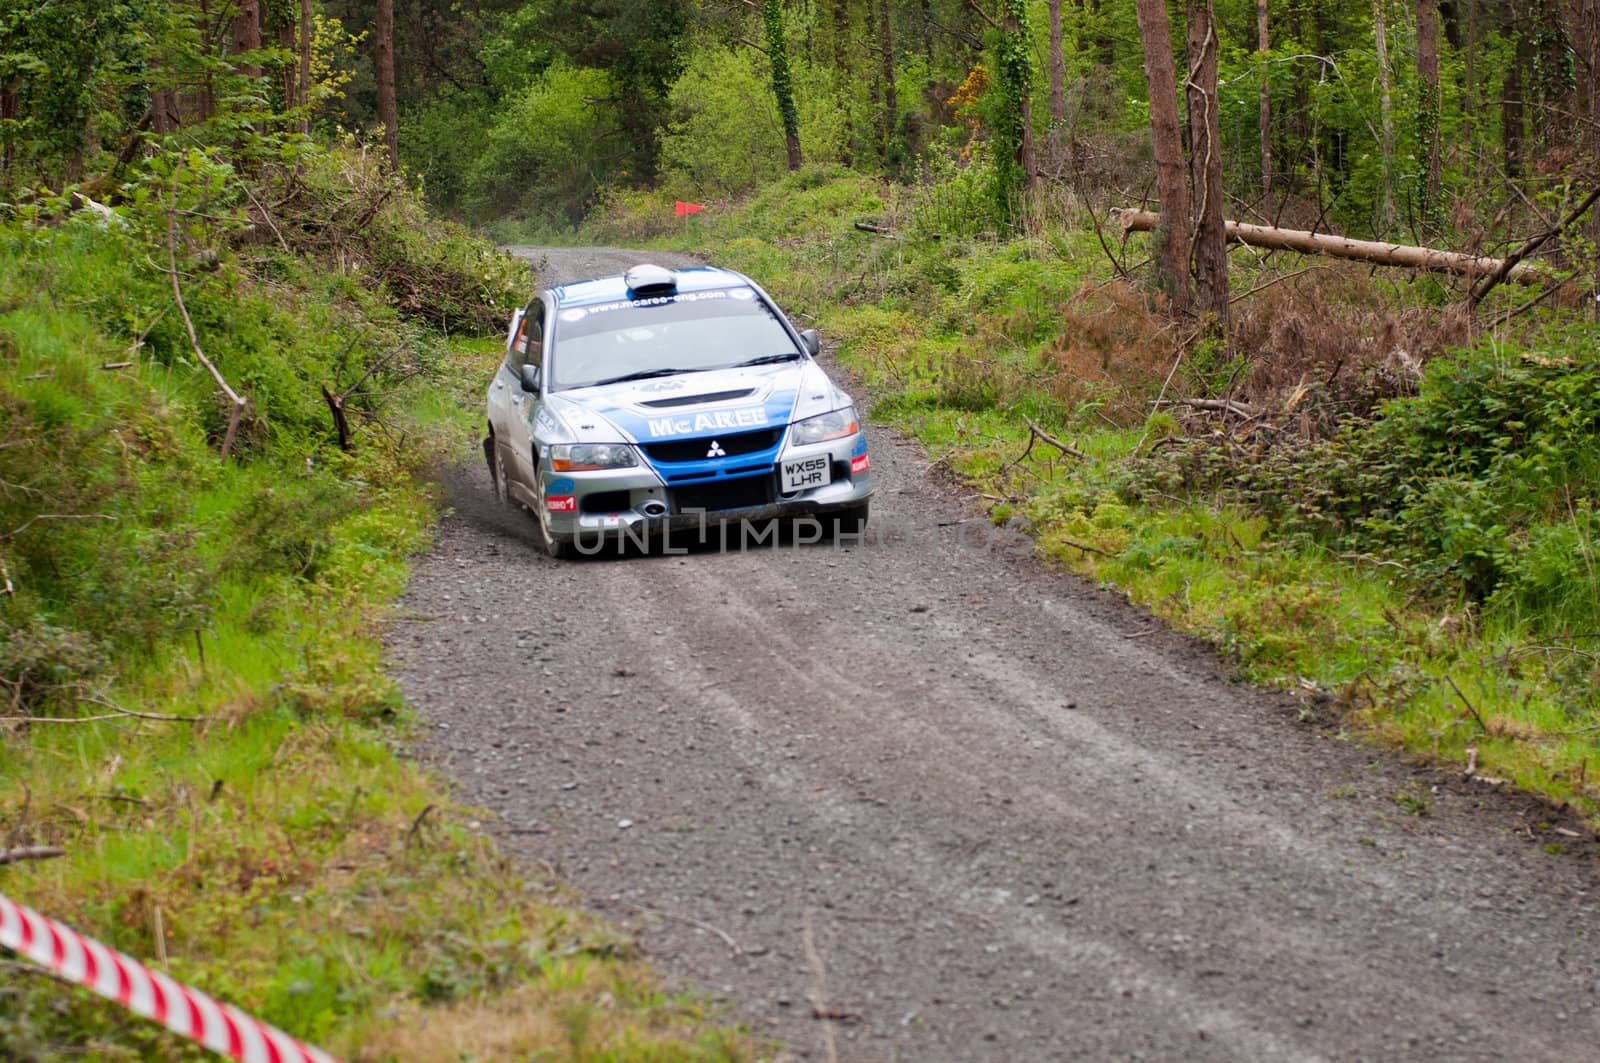 MALLOW, IRELAND - MAY 19: V. Mcaree driving Mitsubishi Evo at the Jim Walsh Cork Forest Rally on May 19, 2012 in Mallow, Ireland. 4th round of the Valvoline National Forest Rally Championship.